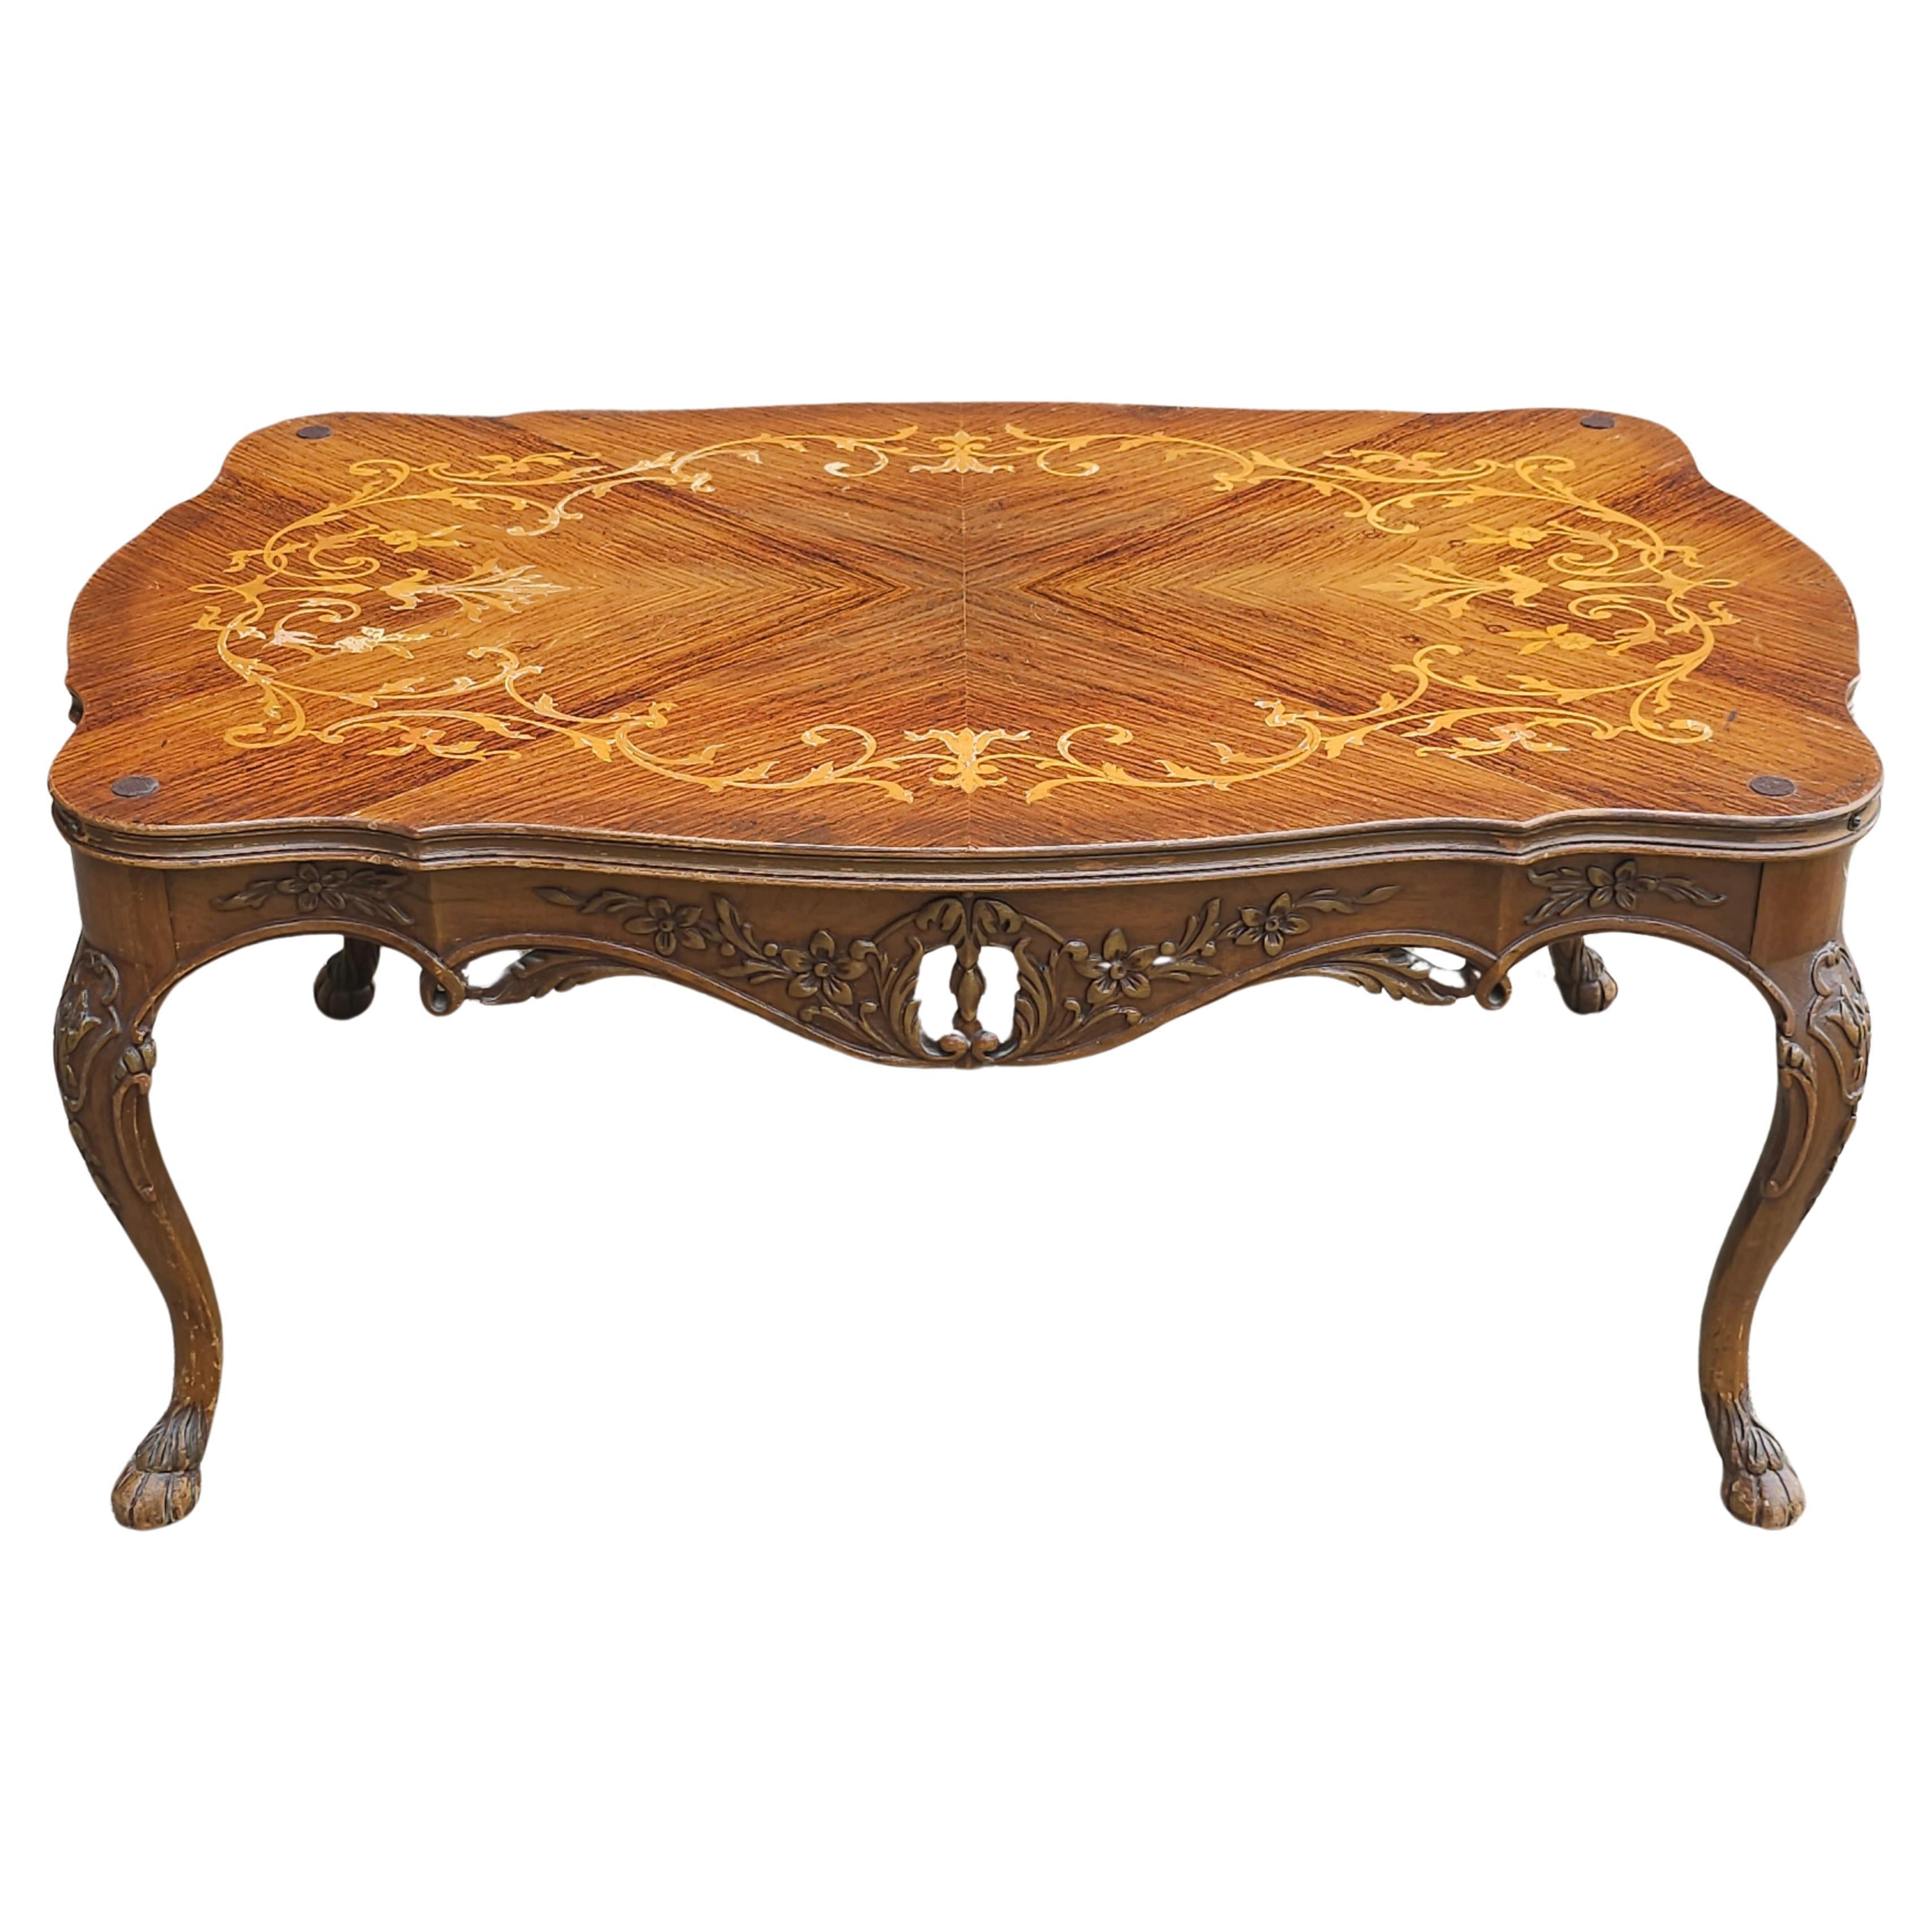 Edwardian Rococo Style Satinwood Marquetry Cocktail Table with Protective Glass  For Sale